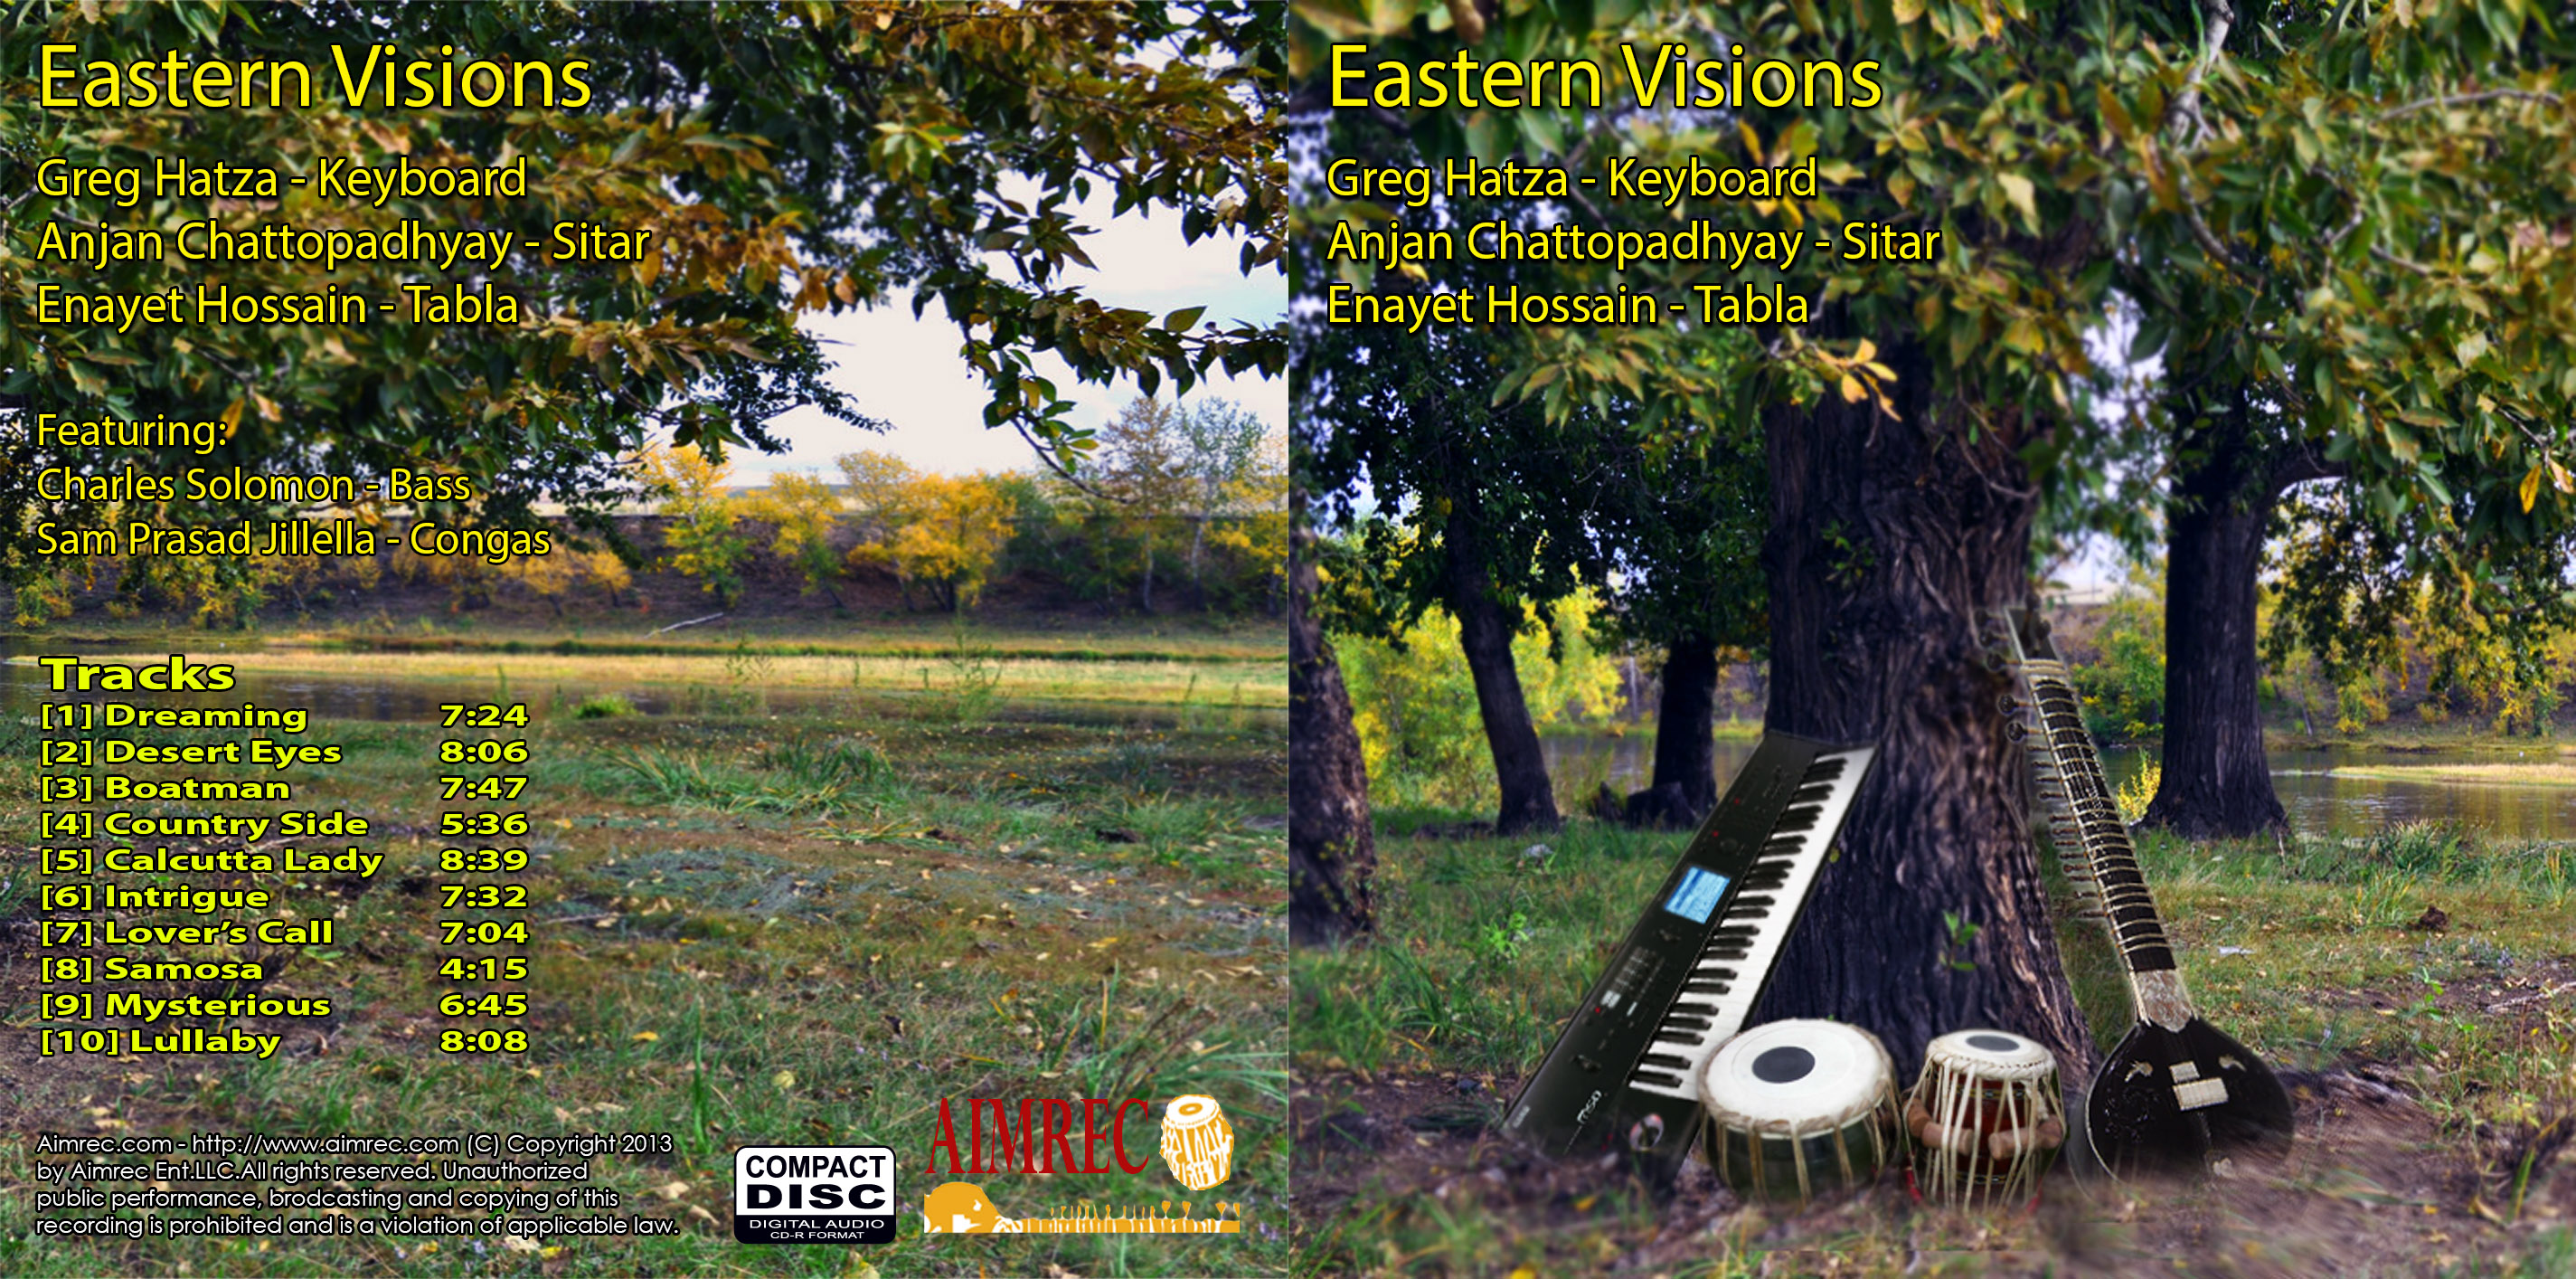 Picture of Eastern Visions album